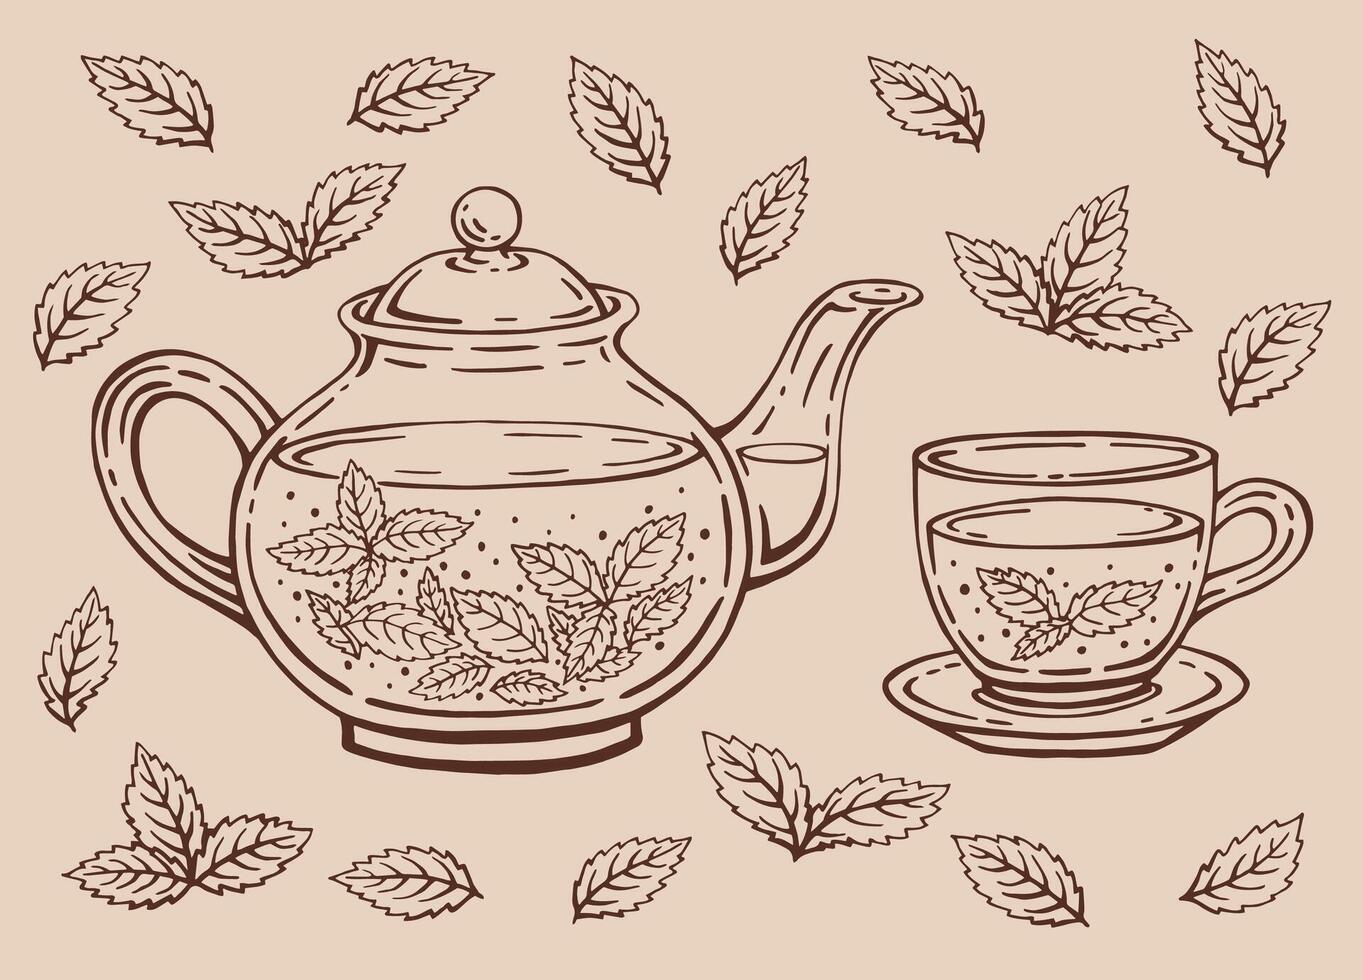 Tea set with healthy green tea, mint leaves. Teapot and cup. Hand drawn vector illustration in outline style.